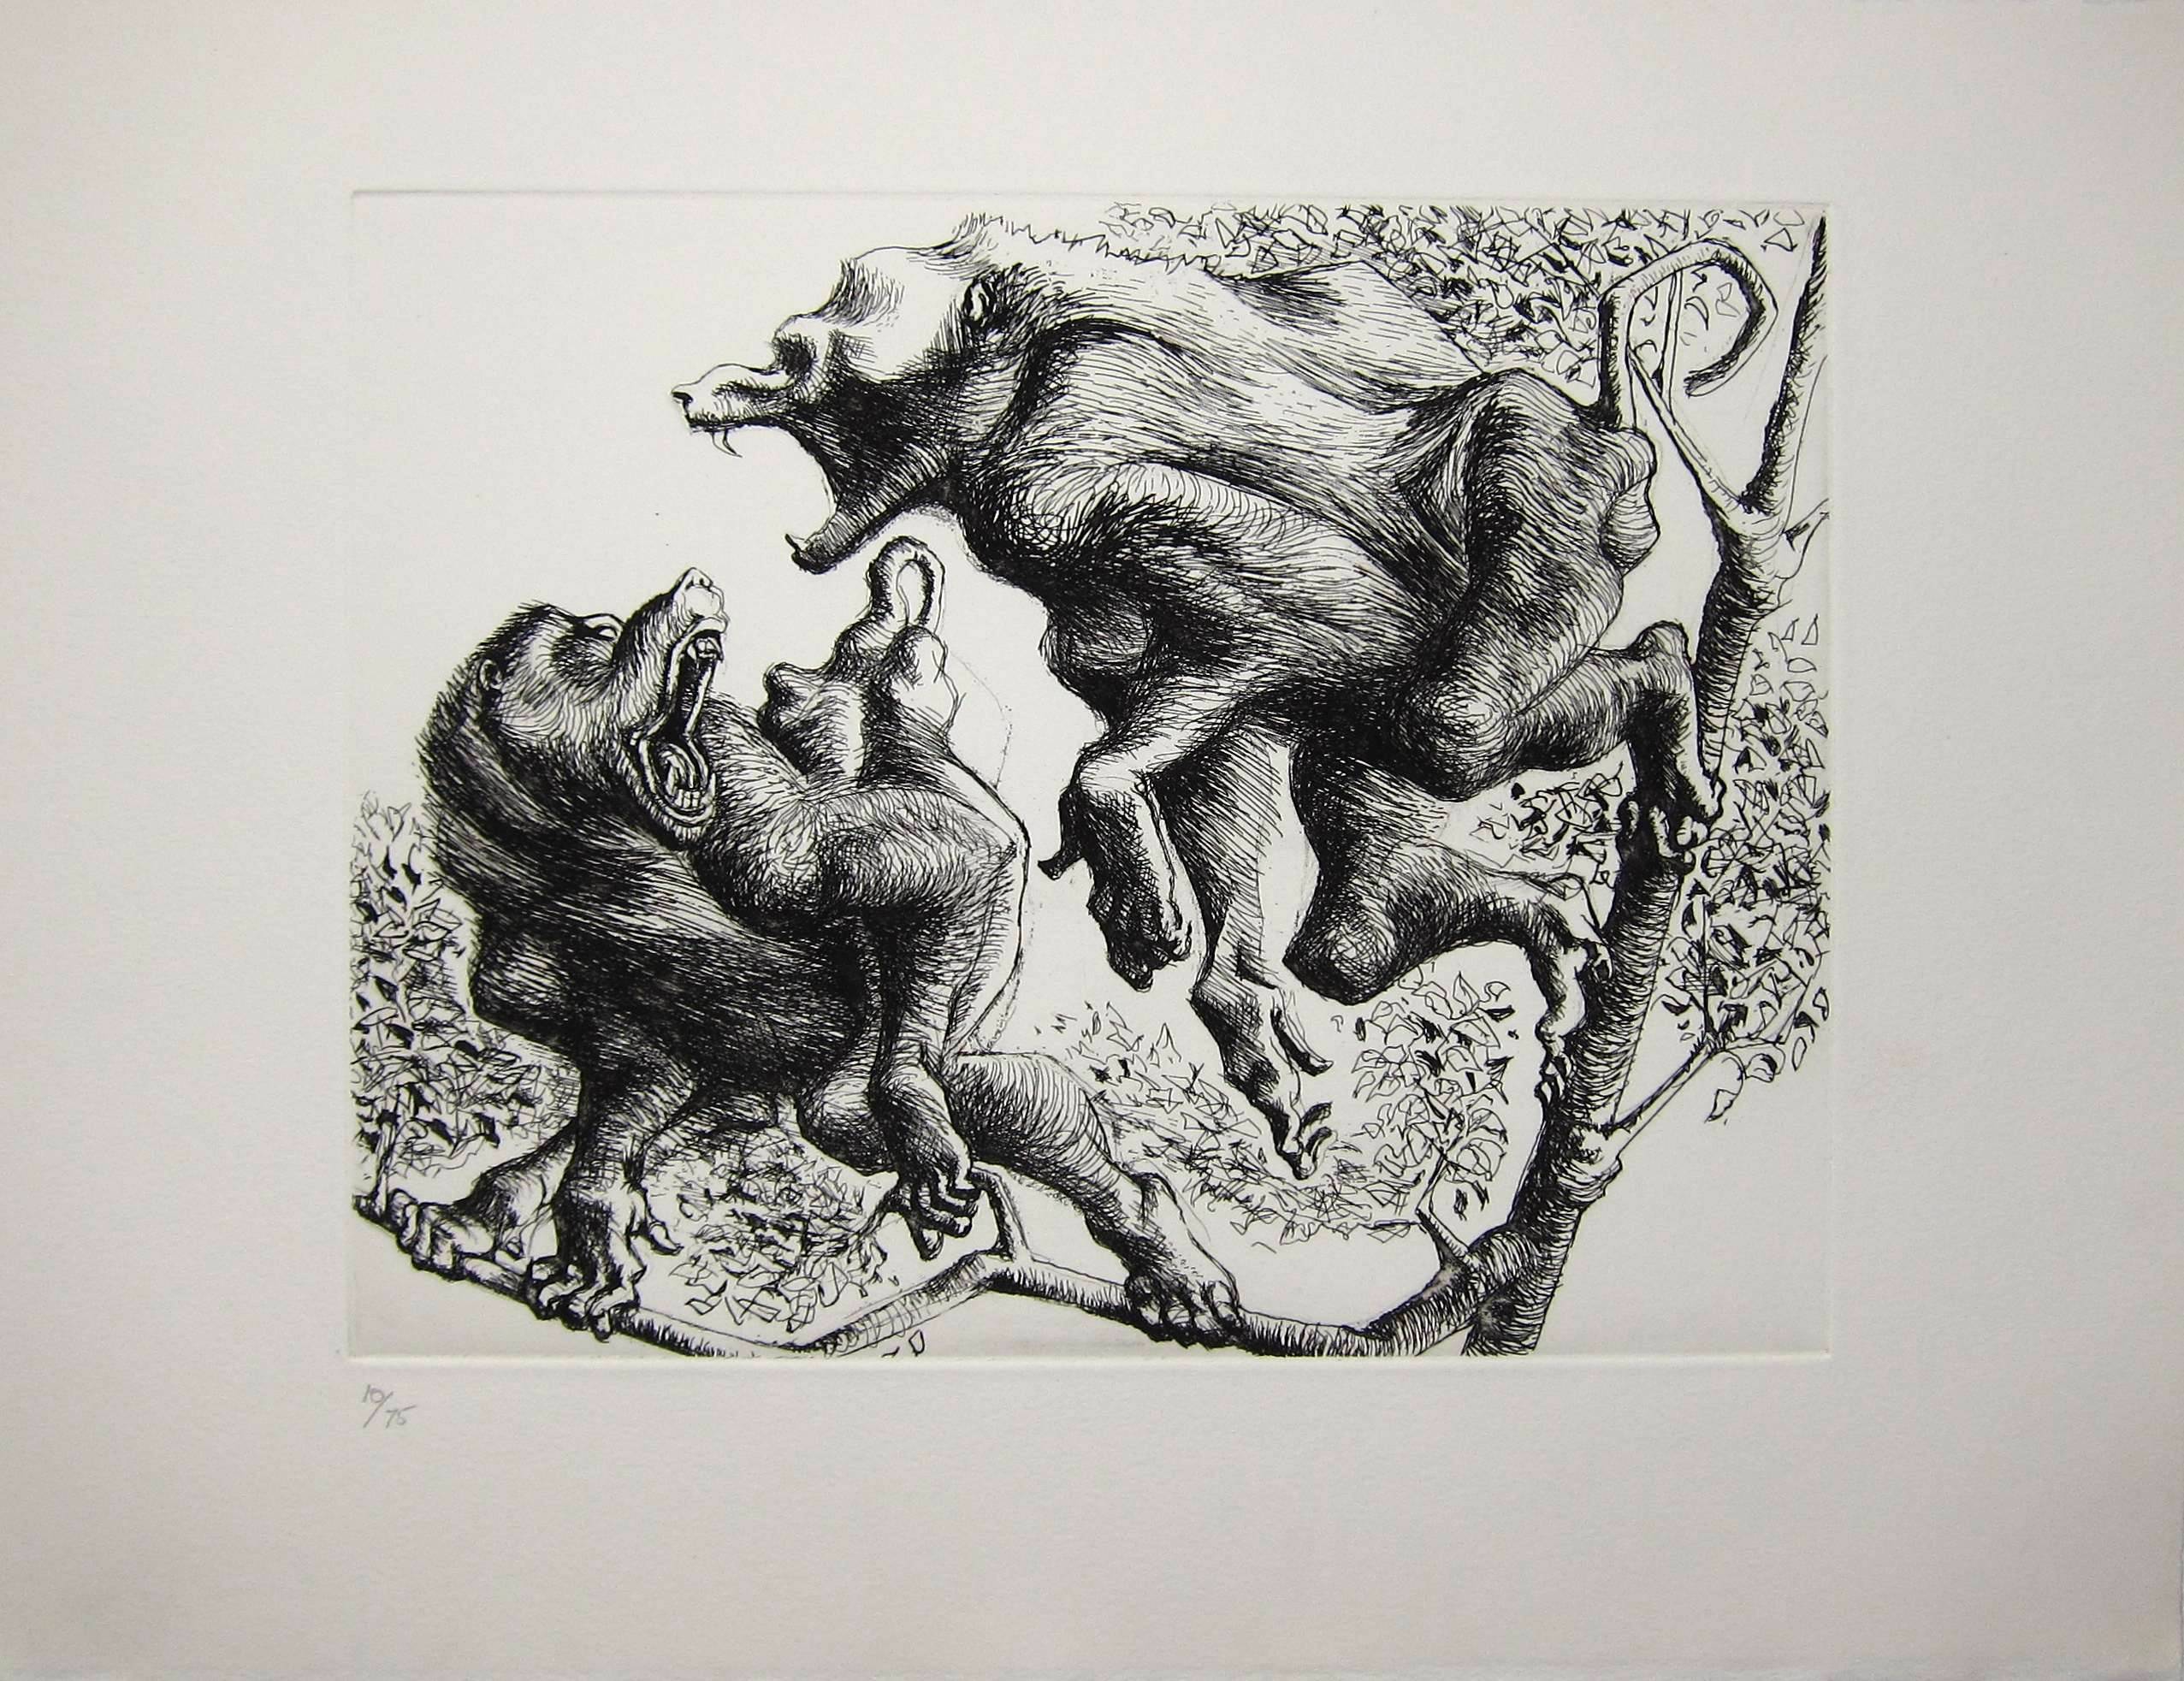 MICHAEL AYRTON [1921-75]. Baboons, 1975. Etching, edition of 75, 10/75. Studio stamp signature on